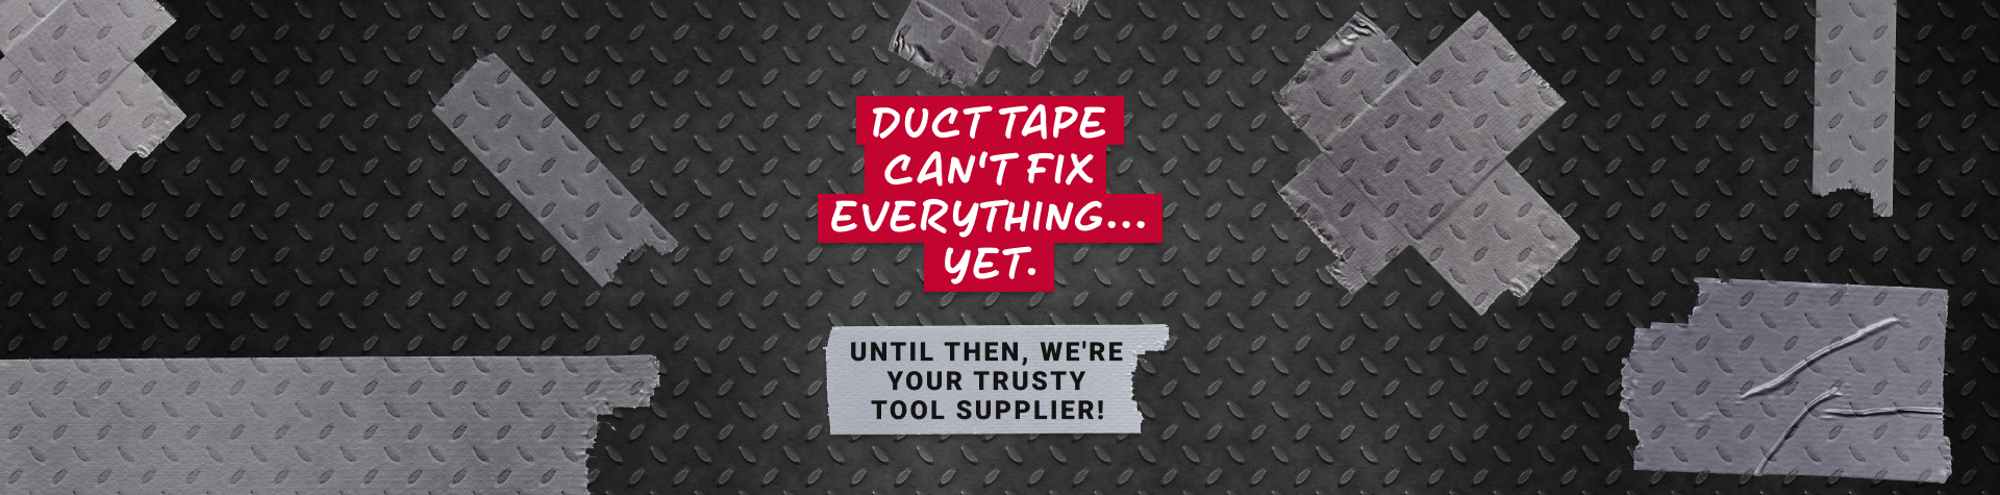 Duct Tape cant fix